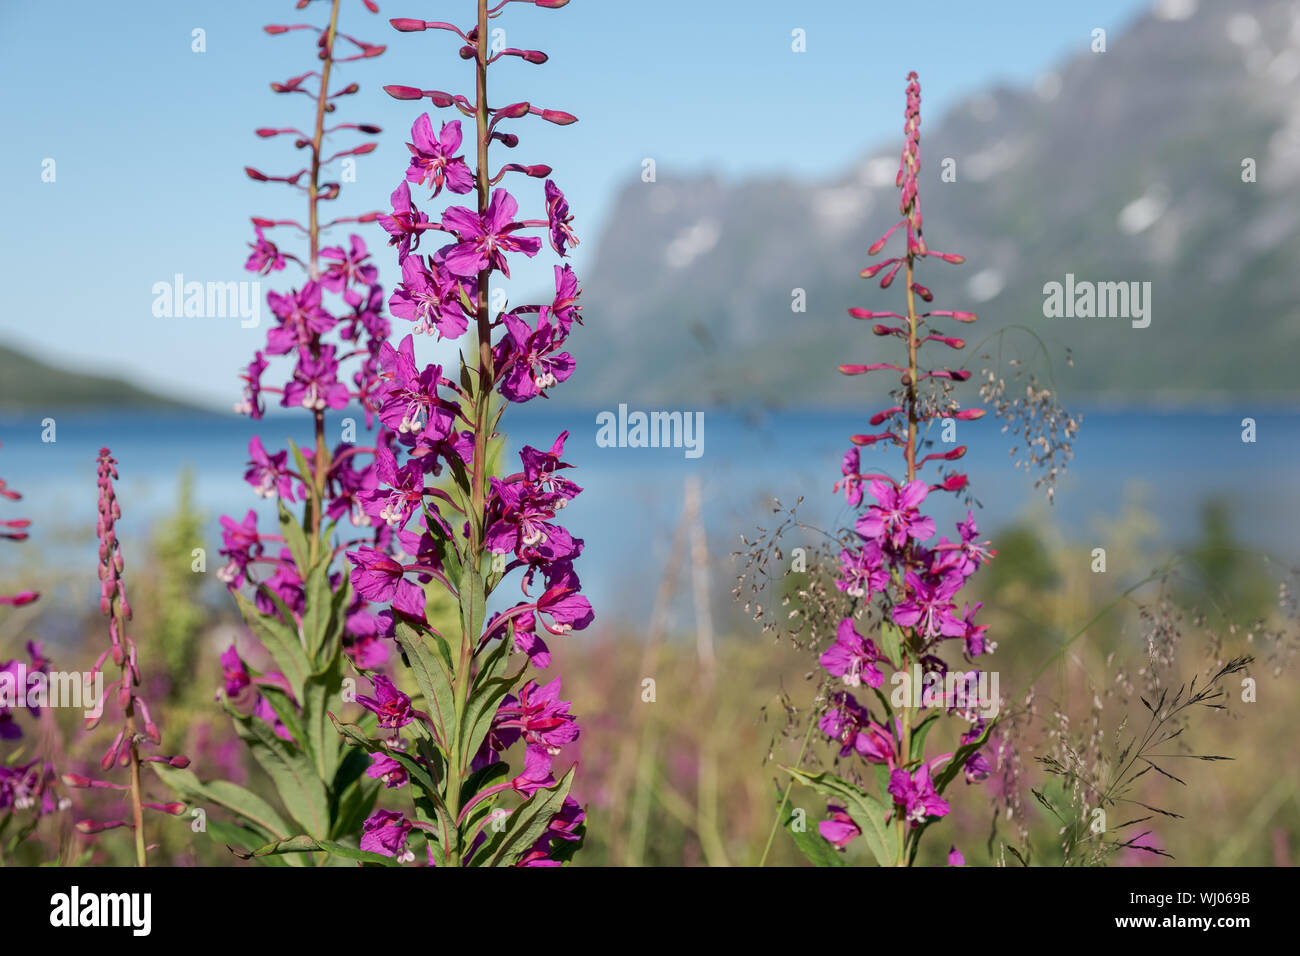 Blooming purple Epilobium angustifolium Willowherb with Ersfjord mountain landscape in background on a sunny day, Tromsö, Norway Stock Photo